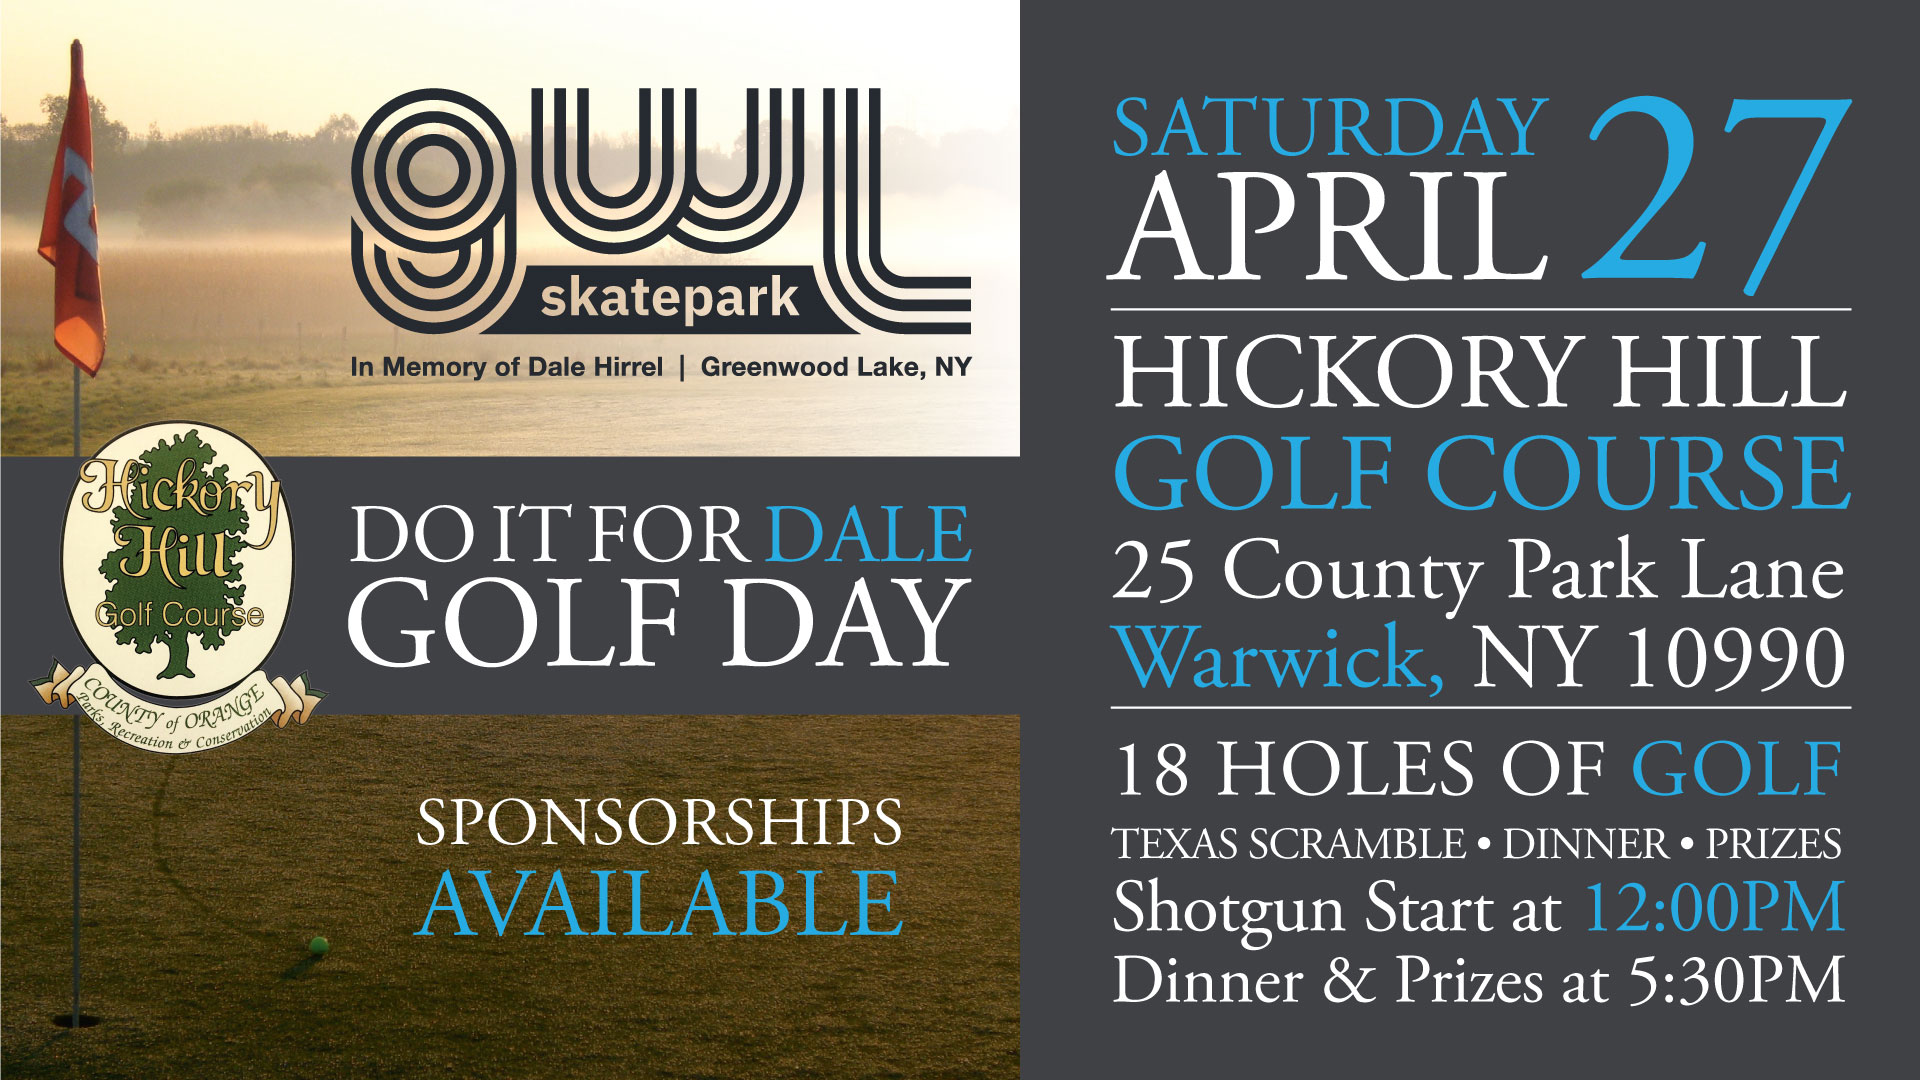 GWLSkatePark fundraising event, Do It For Dale Golf Day, Hickory Hill Golf Course, Warwick NY